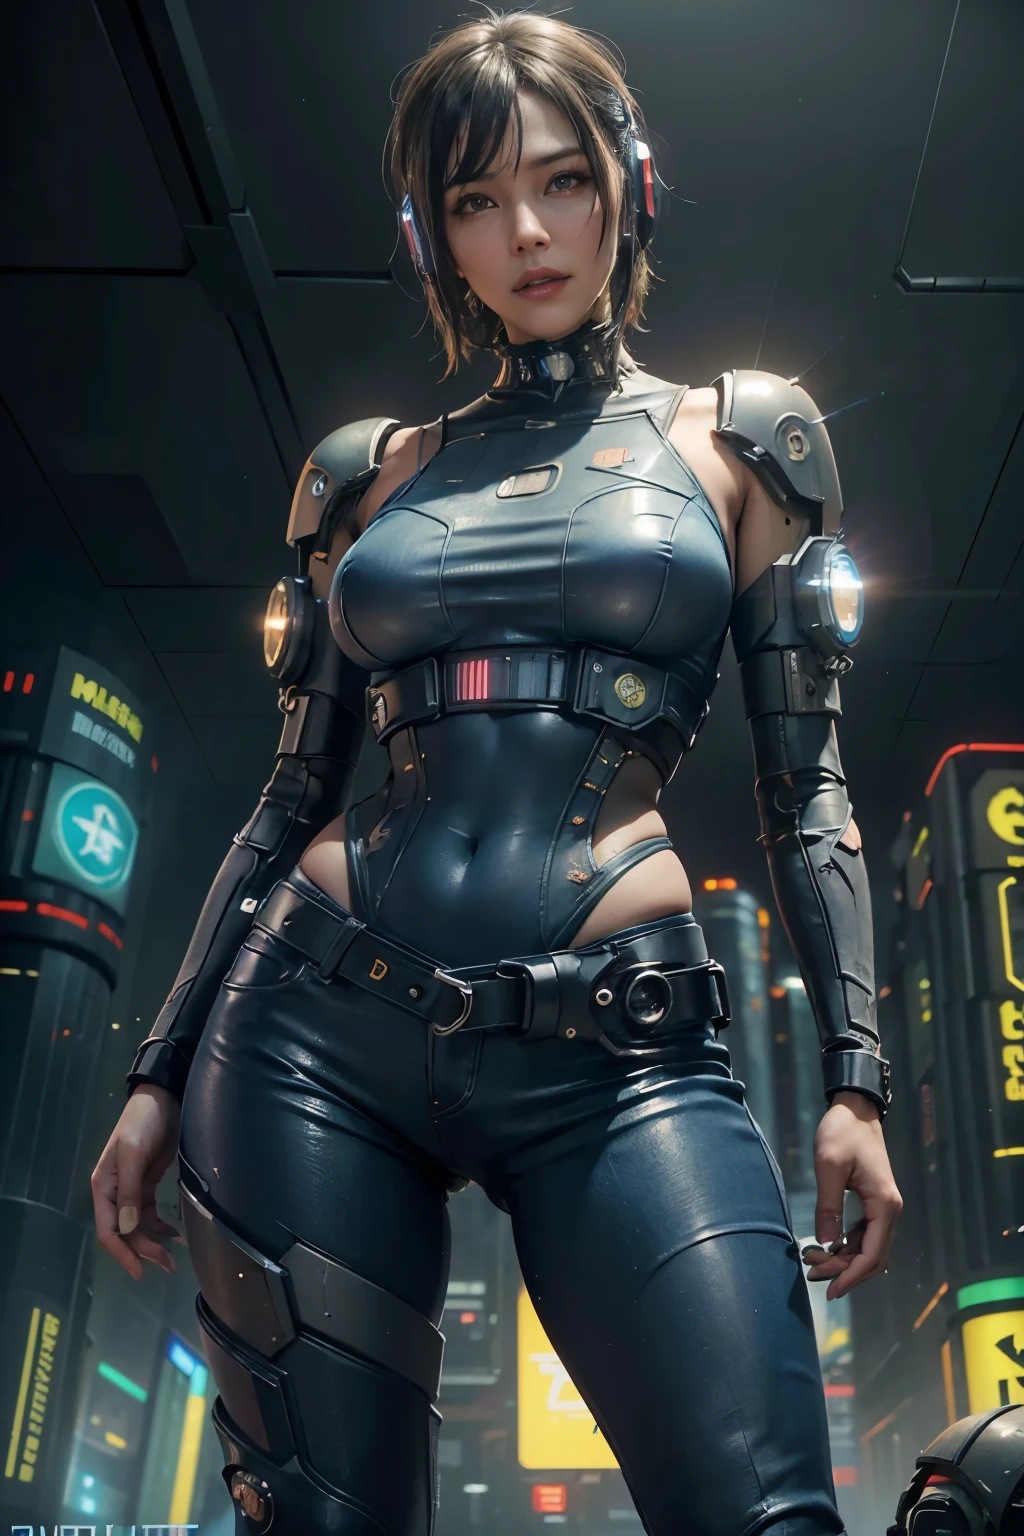 (masterpiece:1.2), ultra detailed, ultra high res, (realistic, photo realistic:1.37), high detail RAW color photo, professional photograph, an extremely delicate and beautiful, extremely detailed, finely detail, huge file size, extremely detailed Light and Shadow Theme Cyberpunk Extra realistic of (bright, cheerful) is (game character Lusy from Fallout Shelter) is (fascinating, beautifully charming), (holding a pistol Minigun) action fighting poses as a character, Vault Tech jumpsuit Sexy, Bodysuit, Vault Tech jumpsuit Couler Blue, Number33, 8k, details High, cinematic lightning, game characters, realistic 8k uhd, unreal engine 5 high rendering, dirty skin details, survival signs, depth of field, dark dust, dirt and smoke., cinematic lighting, (any Pose:1.3), denim pants, (cyberpunk city:1.4), (from below:1.4), techwear, outfit,
